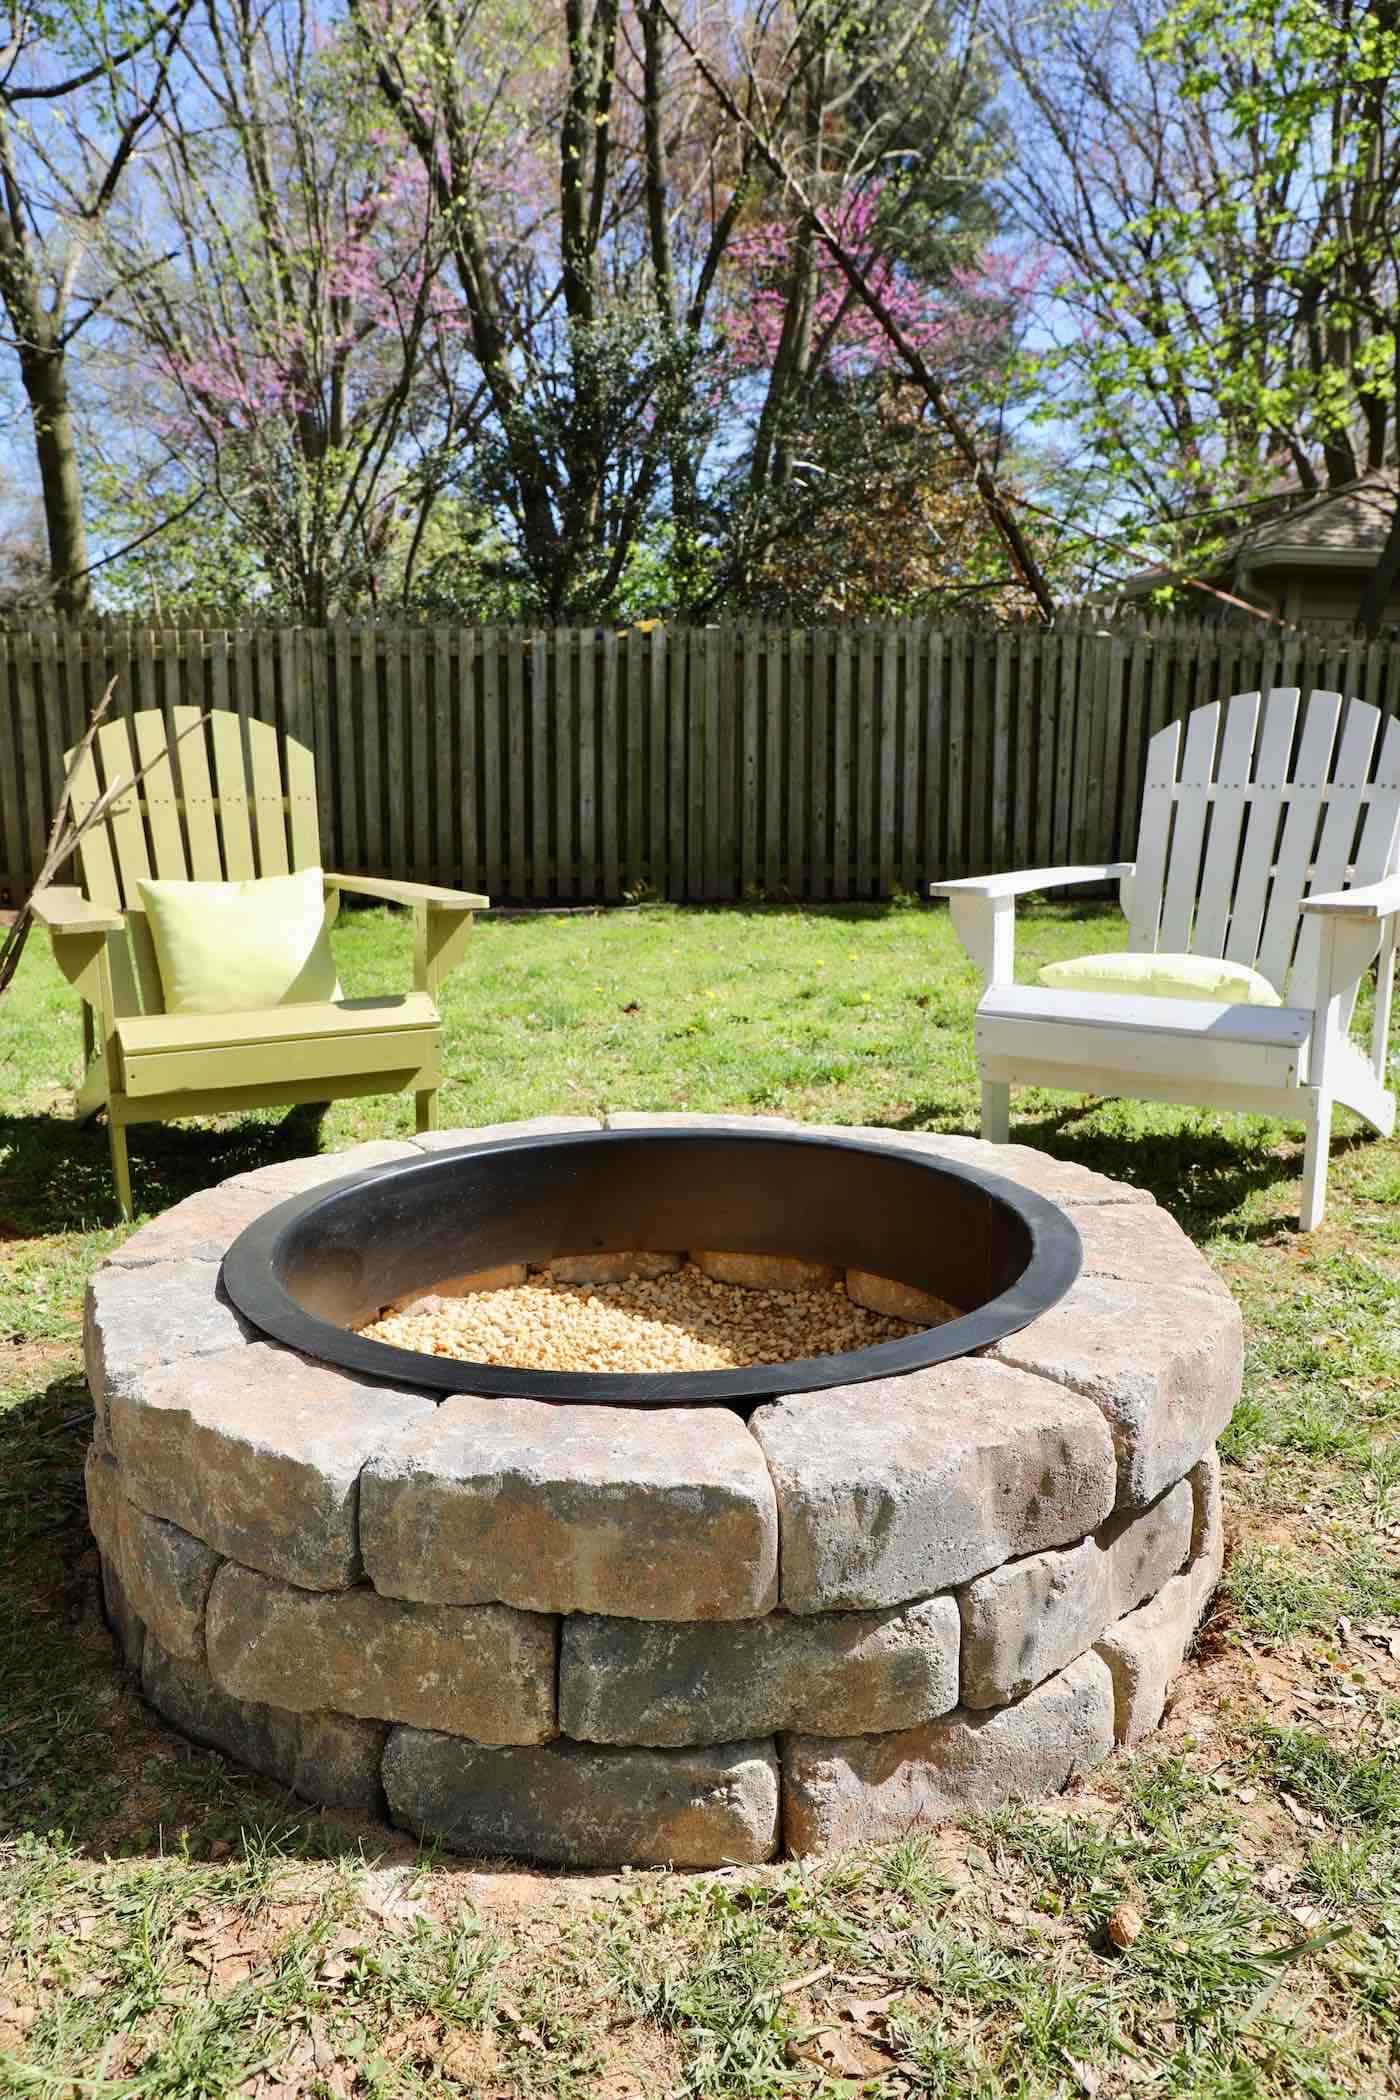 Diy Fire Pit With Gravel Stones, What Stones Are Safe For A Fire Pit